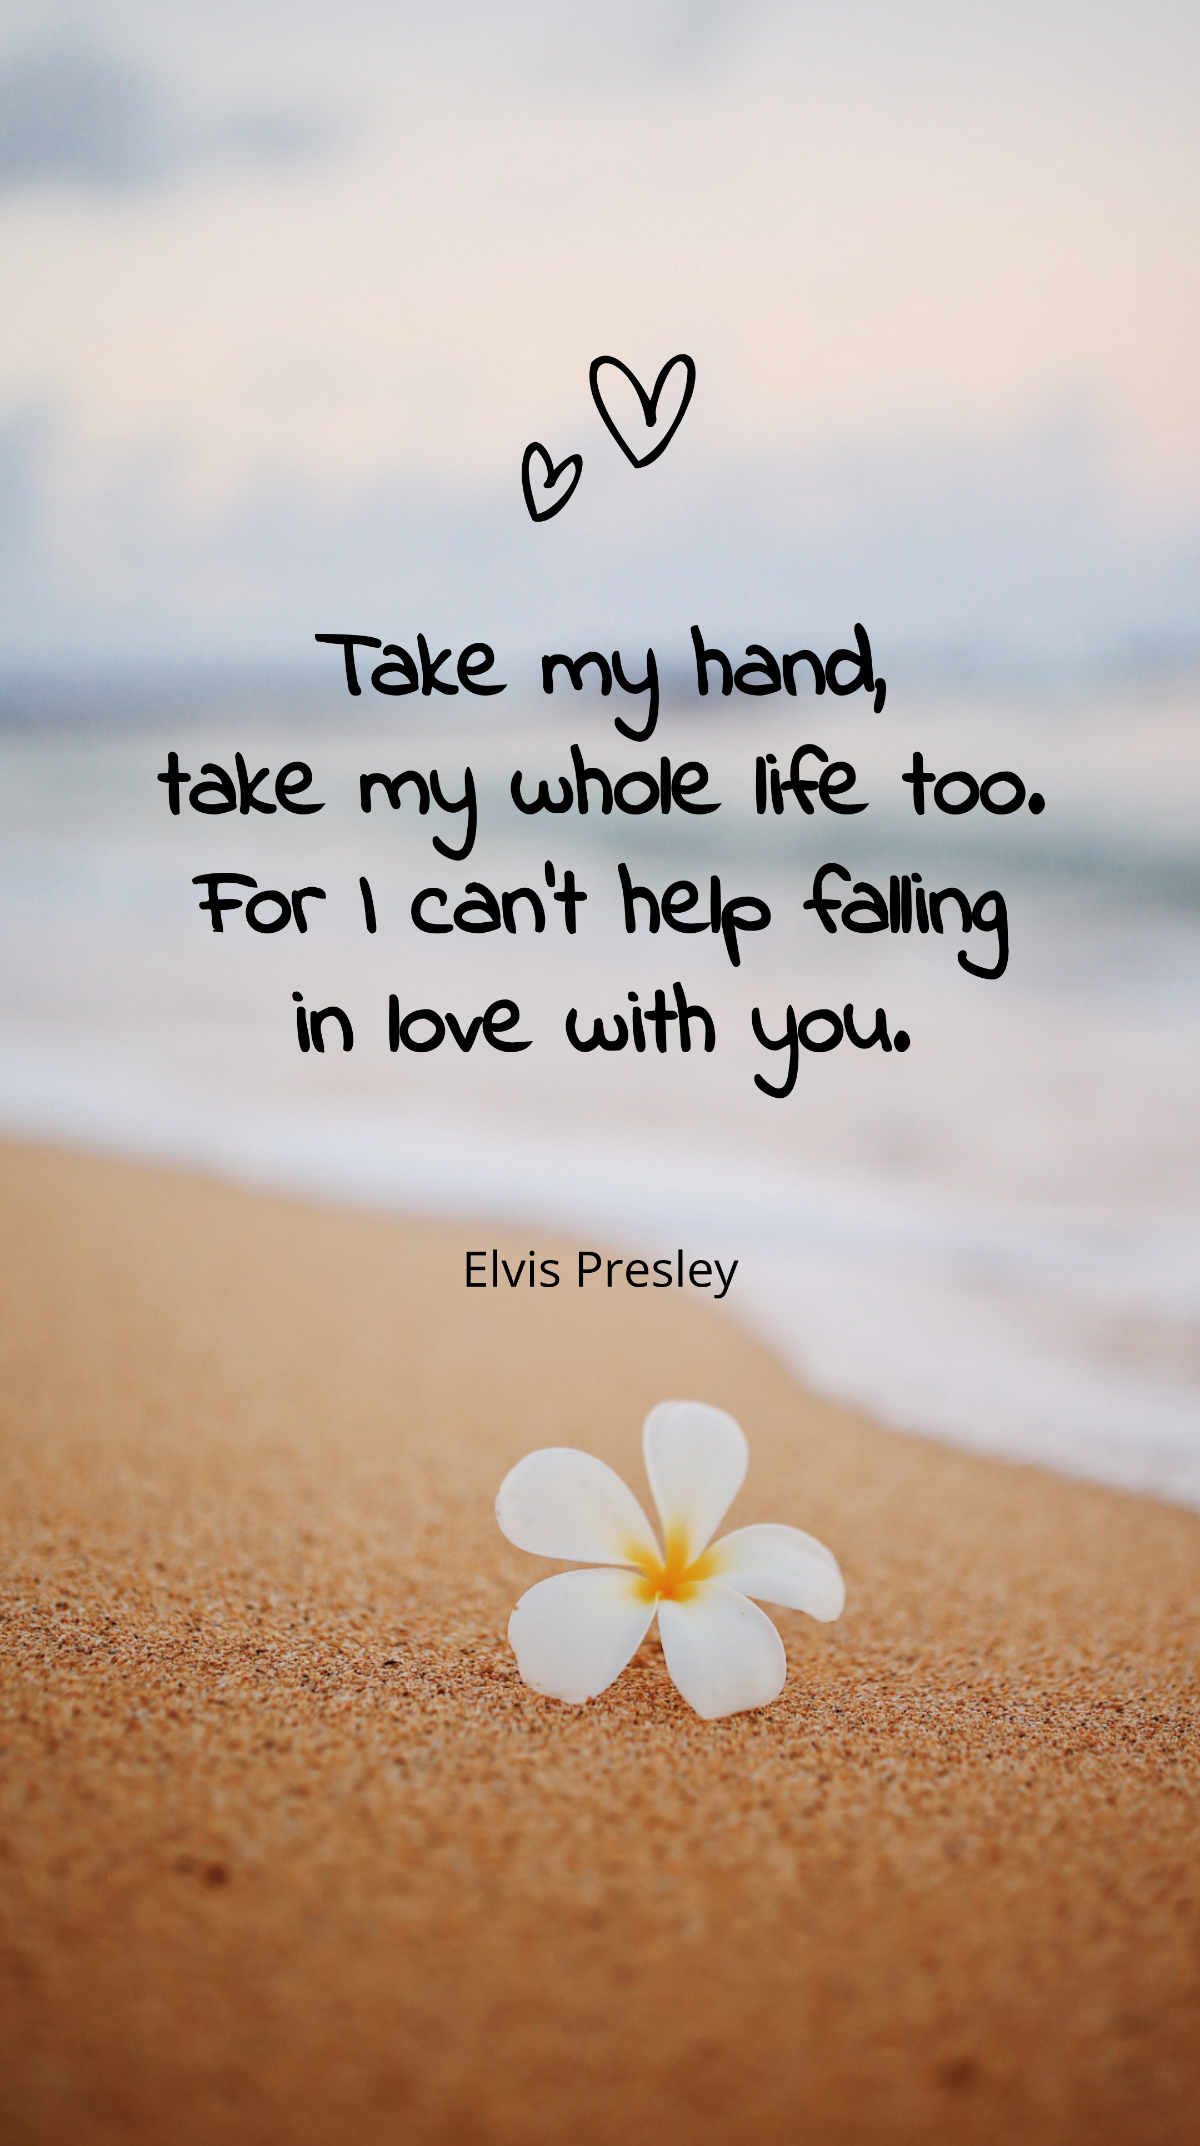 Elvis Presley - “Take my hand, take my whole life too. For I can’t help falling in love with you.” Template